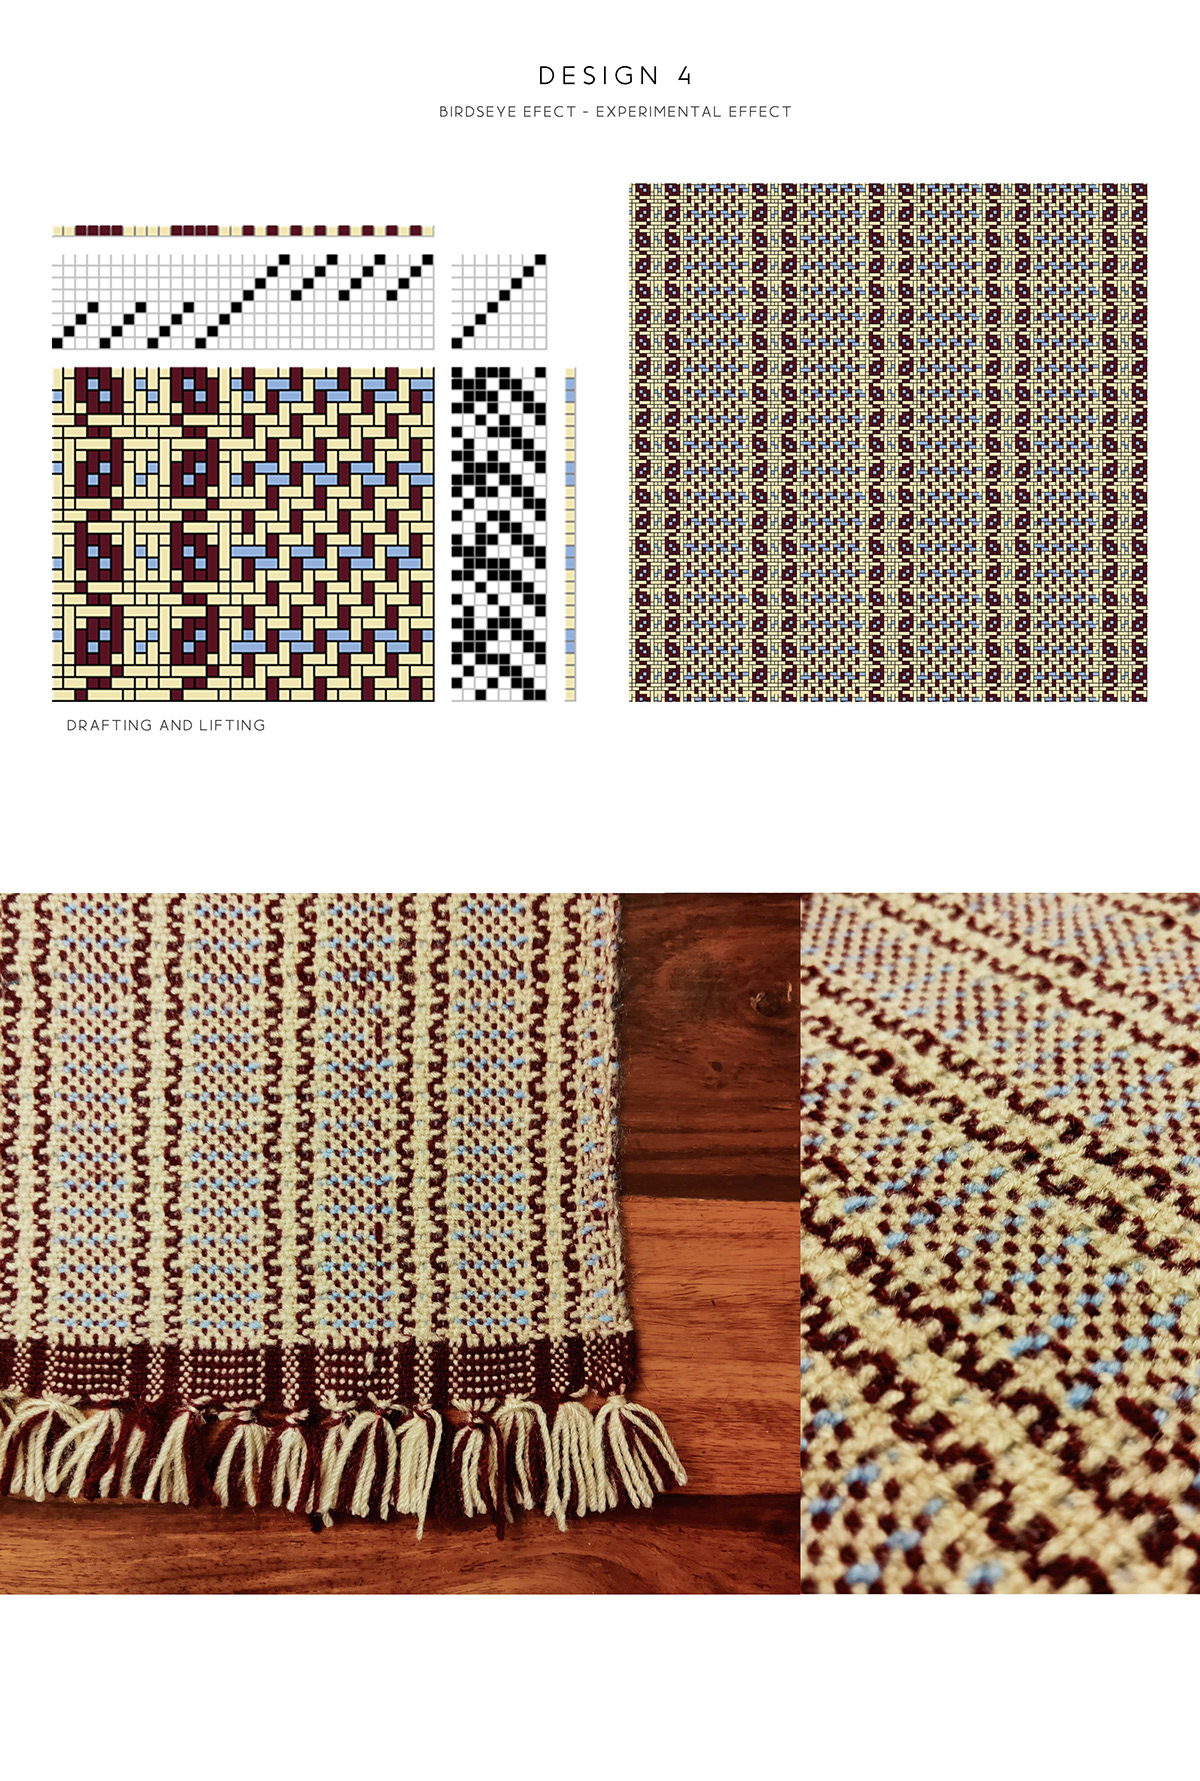 Weave Design Drafting loom Woven neutrals colour and weave effect loom weaving Sartorial